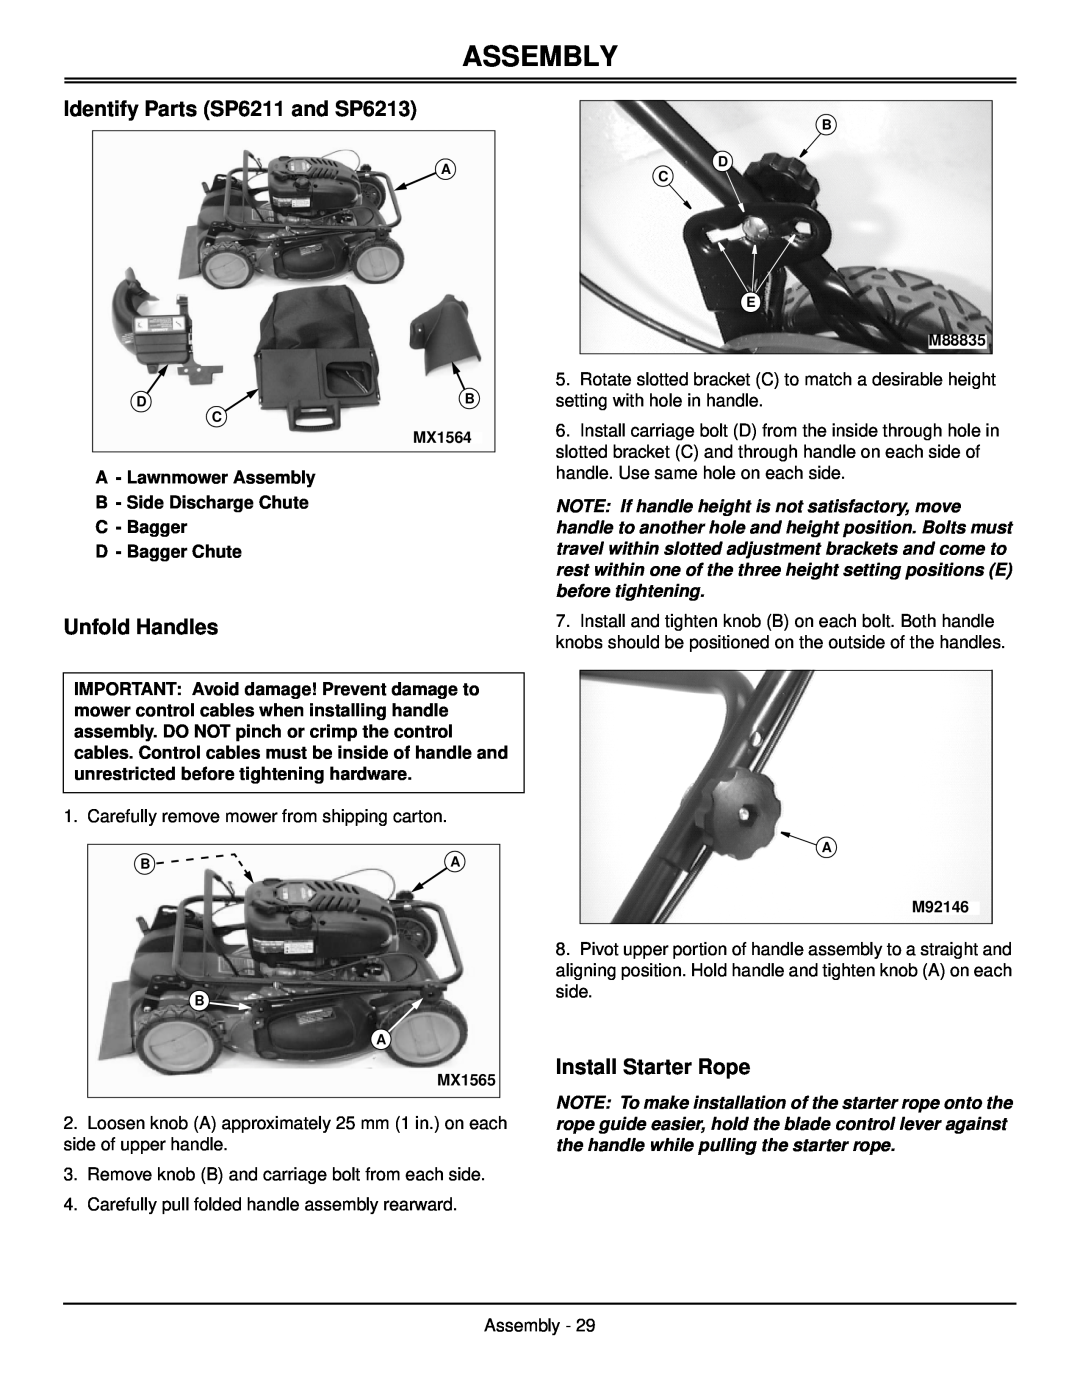 Scotts manual Assembly, Identify Parts SP6211 and SP6213, Unfold Handles, Install Starter Rope 